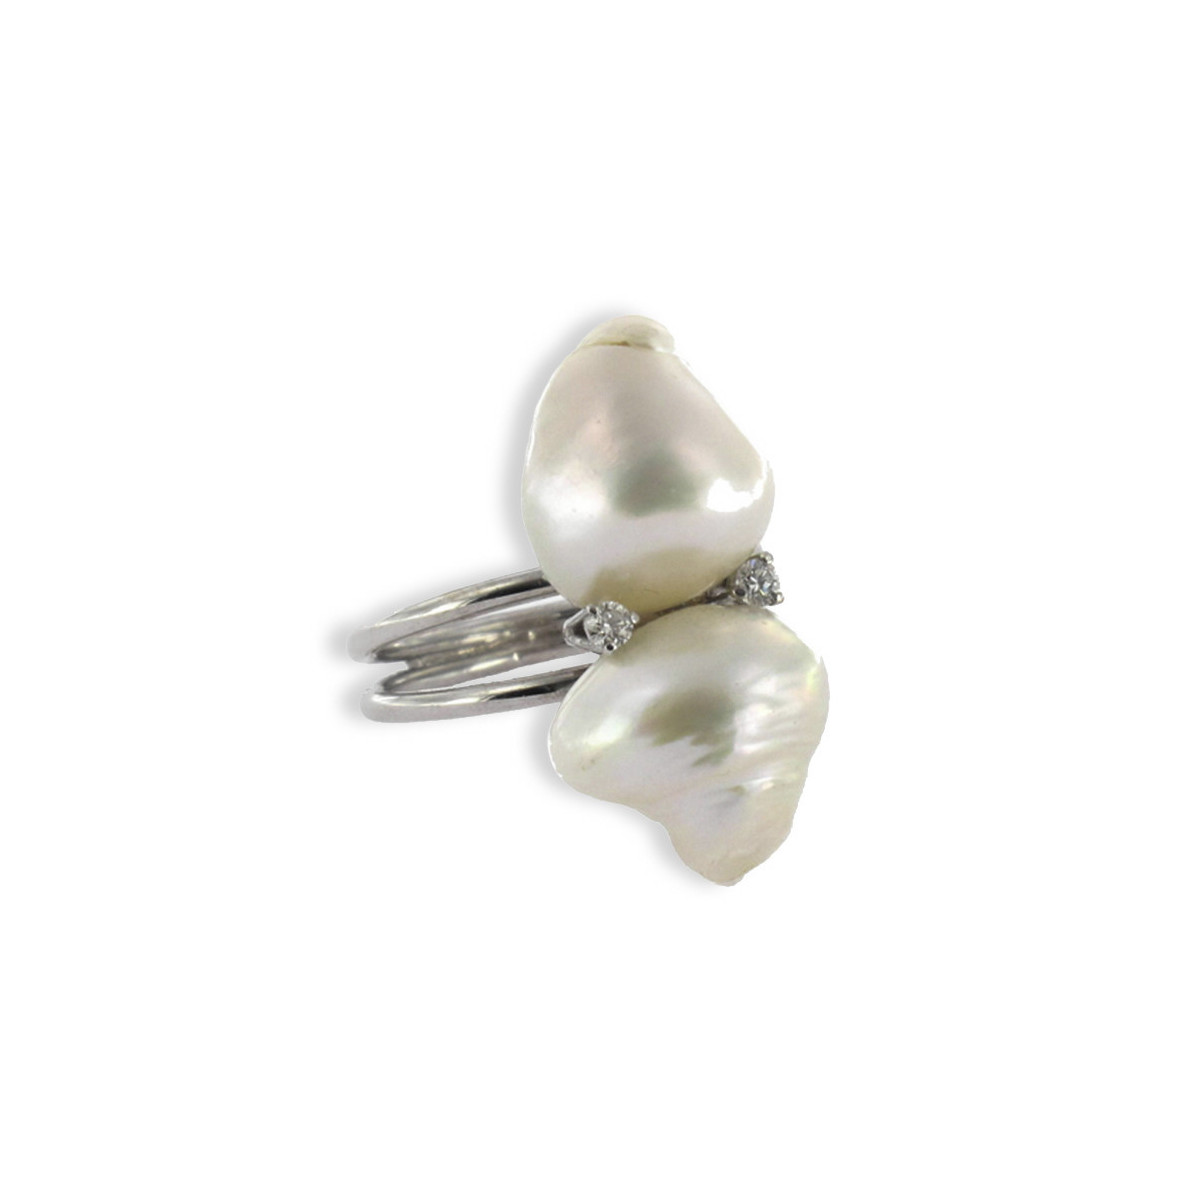 RING 2 BAROQUE PEARLS AND 2 DIAMONDS